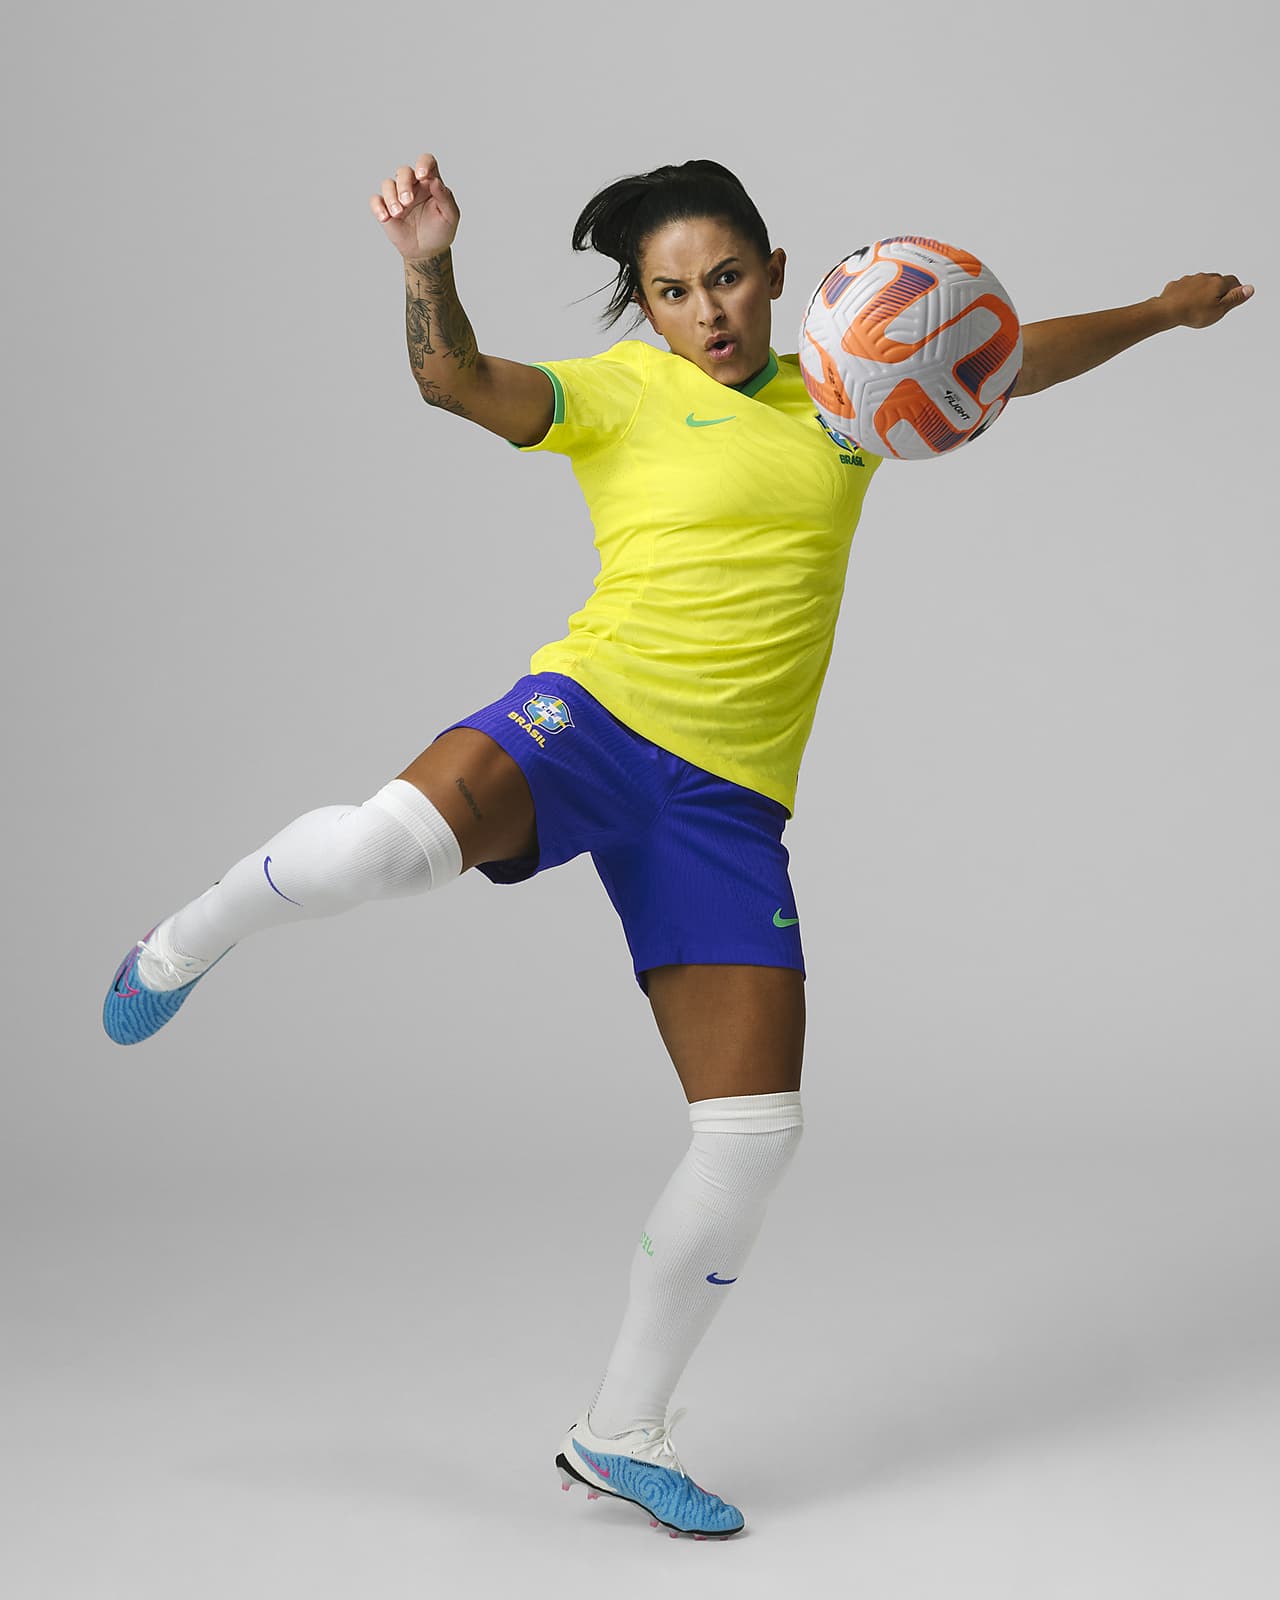 Women's Soccer Gear and Accessories